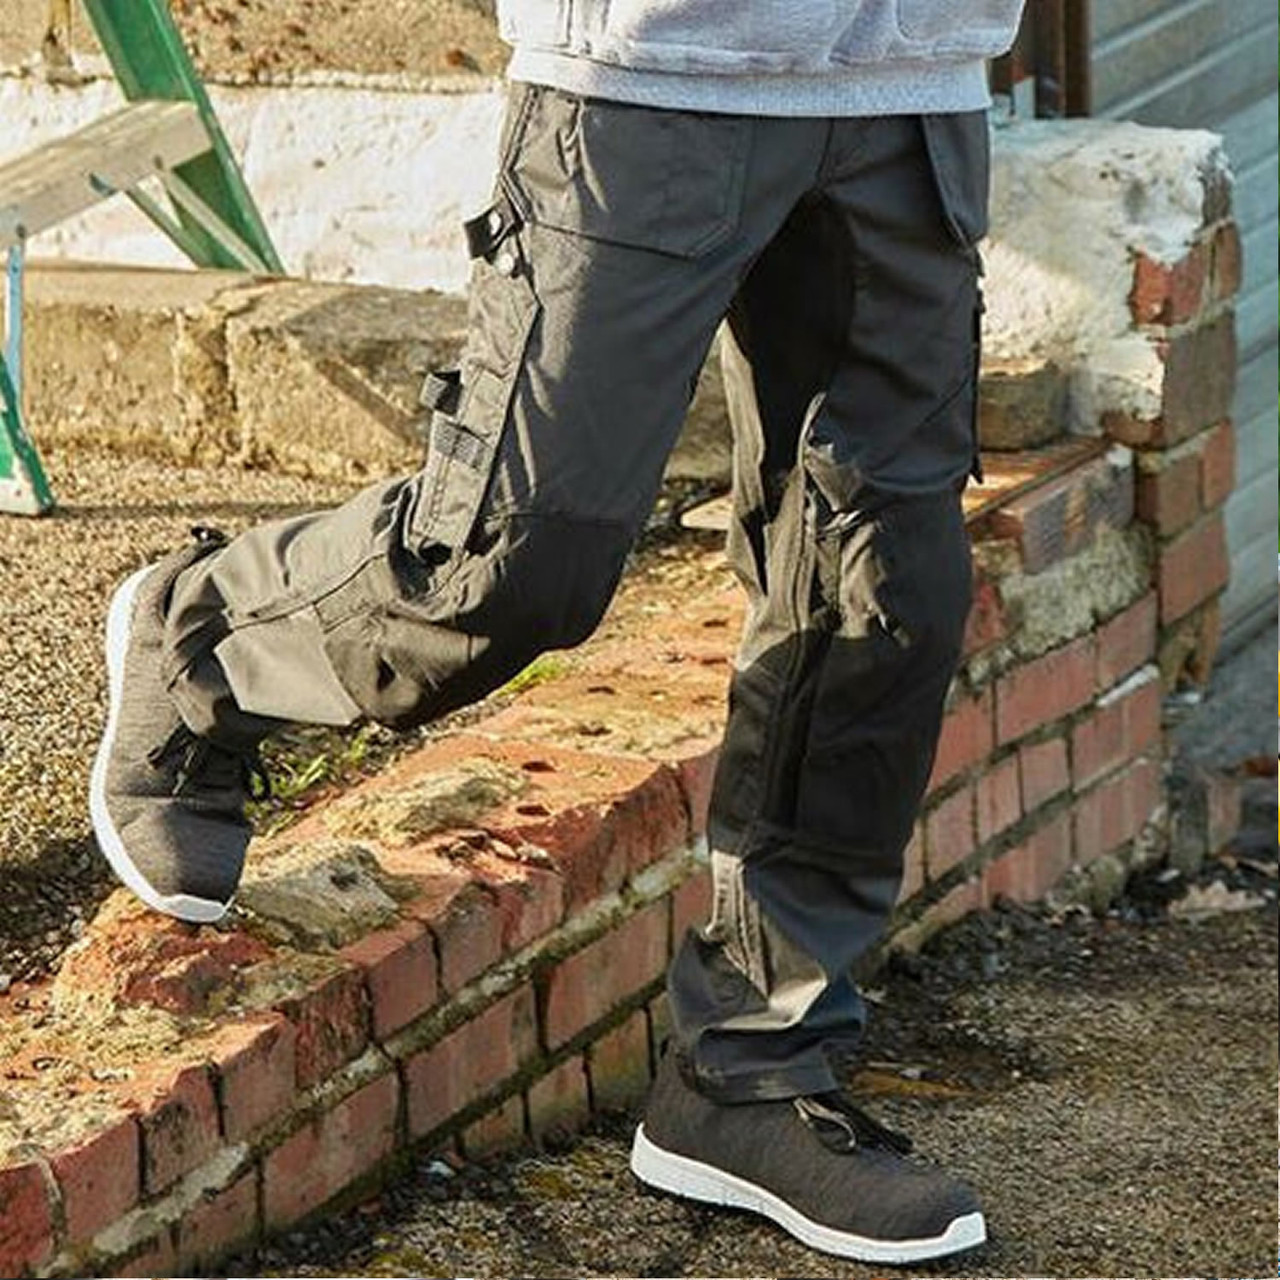 LMA Workwear Argile Two Tone Work Trousers with Kneepad Pockets